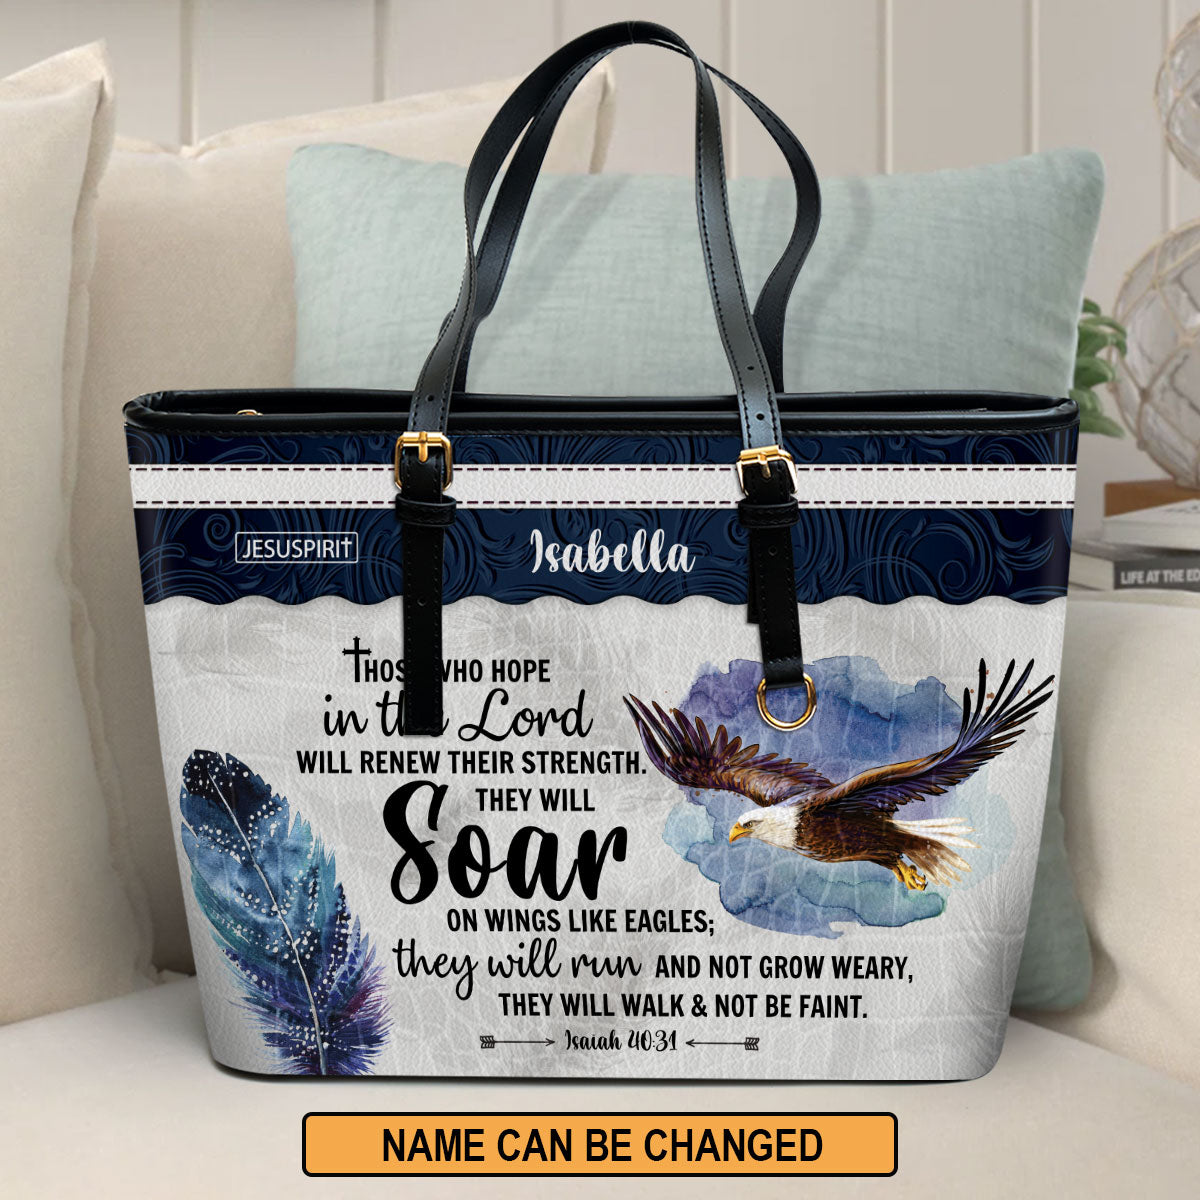 They Will Soar On Wings Like Eagles - Personalized Large Leather Tote Bag NUHN310